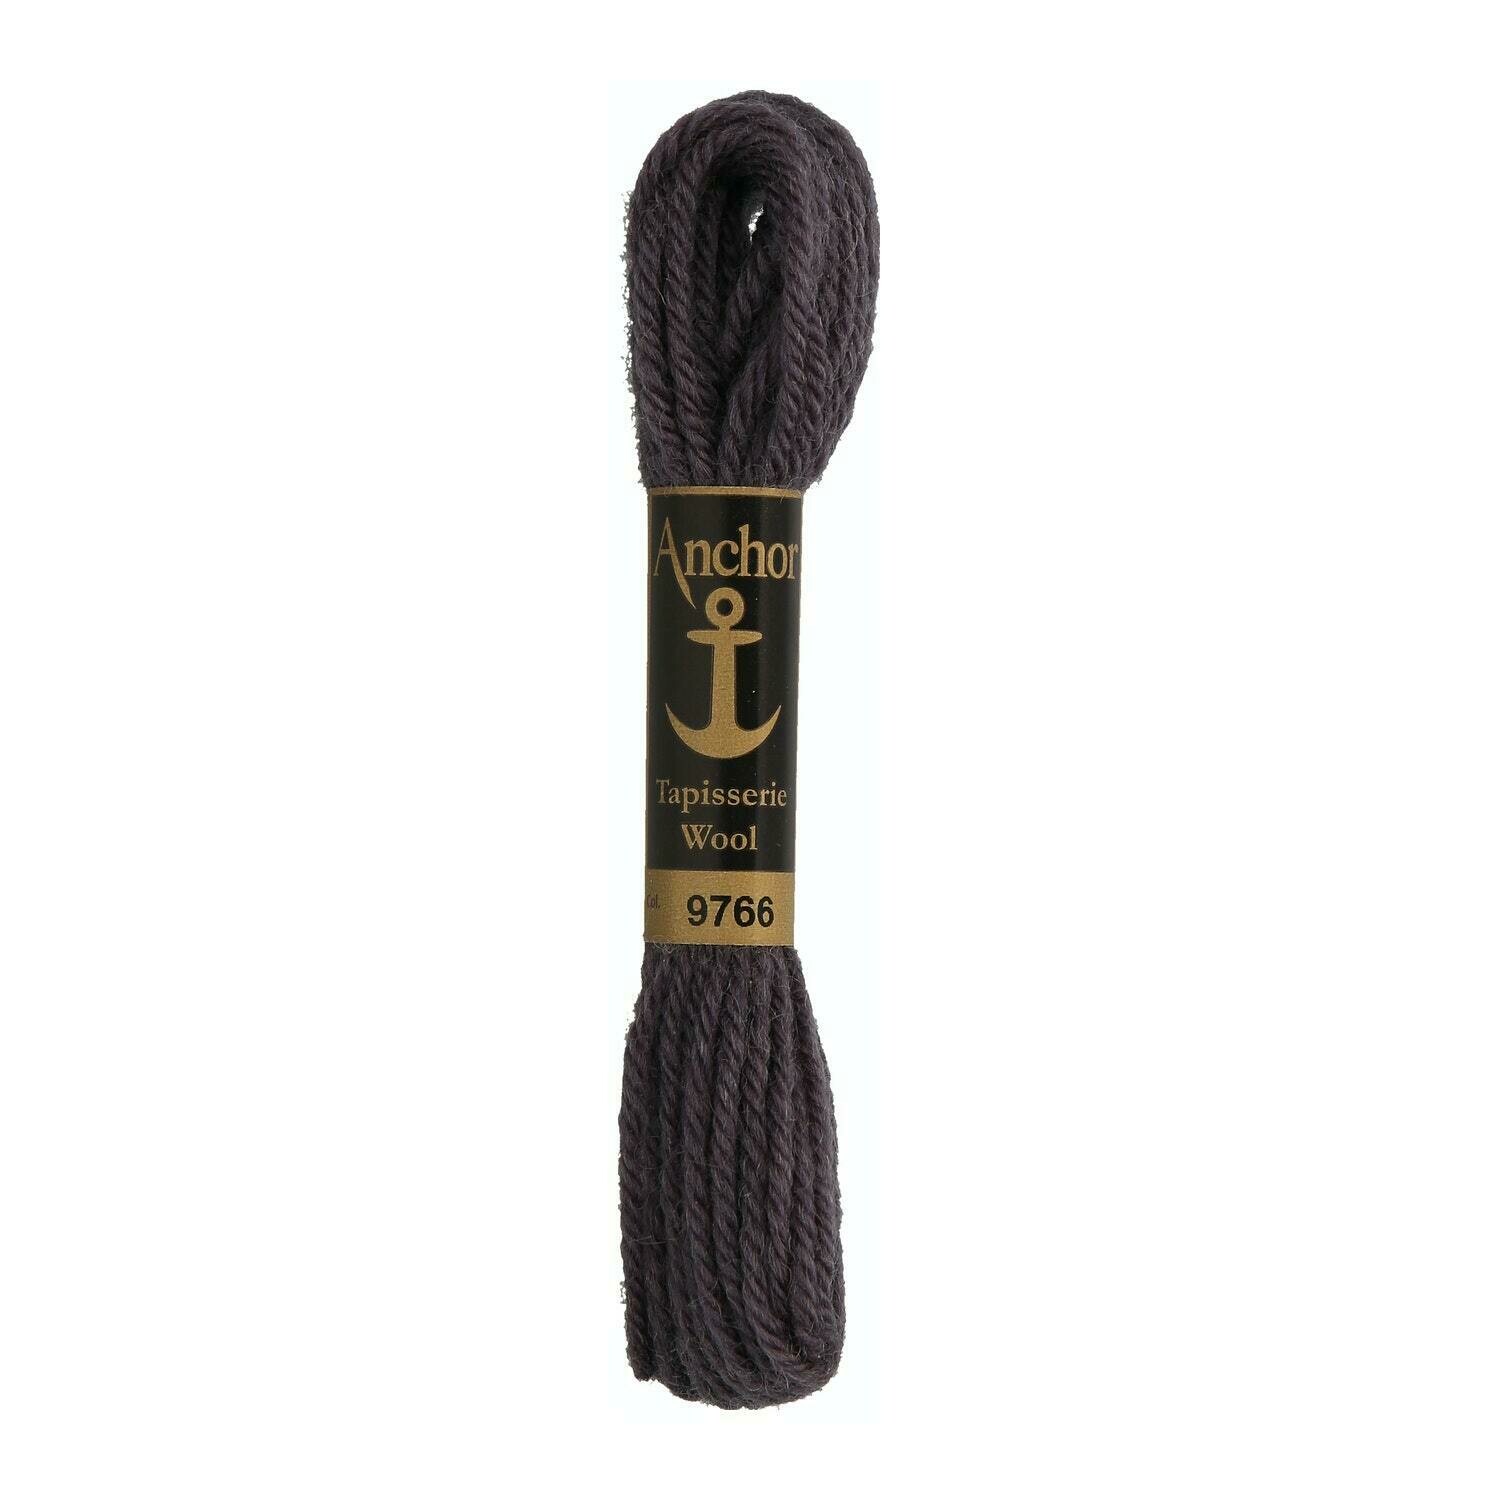 Anchor Tapisserie Wool #09766